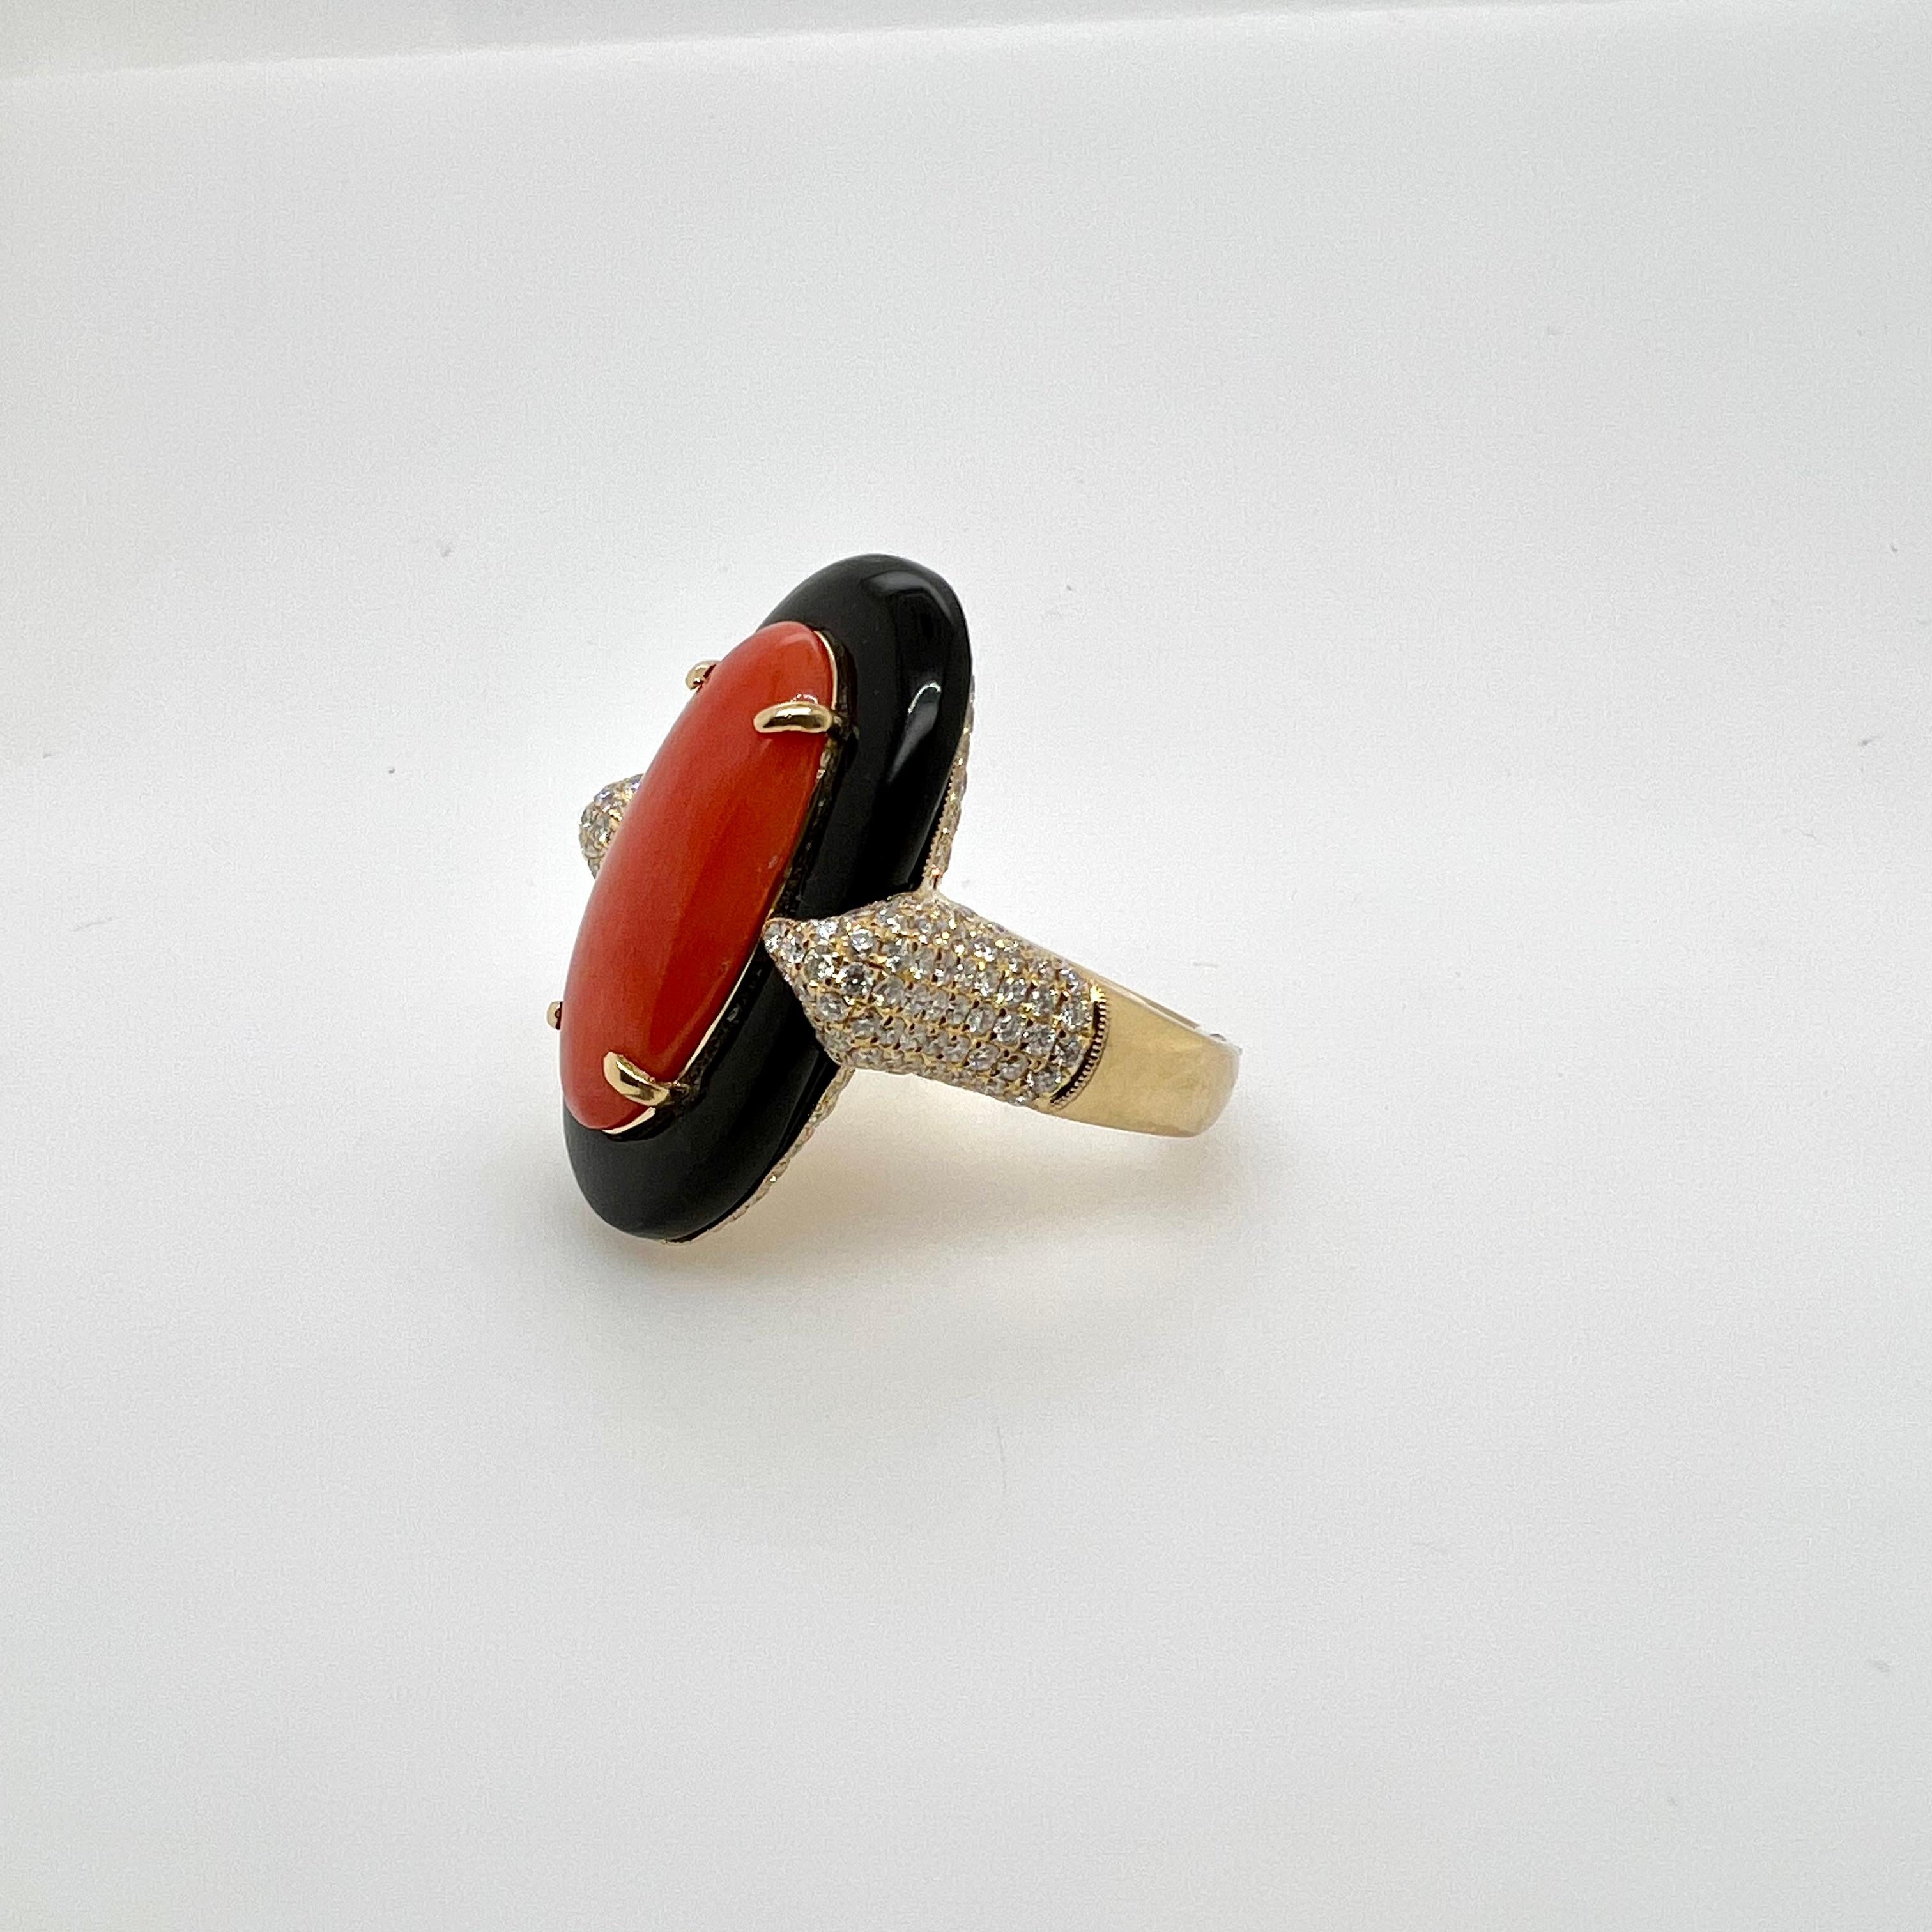 One of our iconic designs!  A truly remarkable design with our custom cut onyx and diamond setting to fit the elongated oval coral.  The meticulous workmanship is on full display and will definitely gain everyones attention!

Diamonds: 1.70 cts,